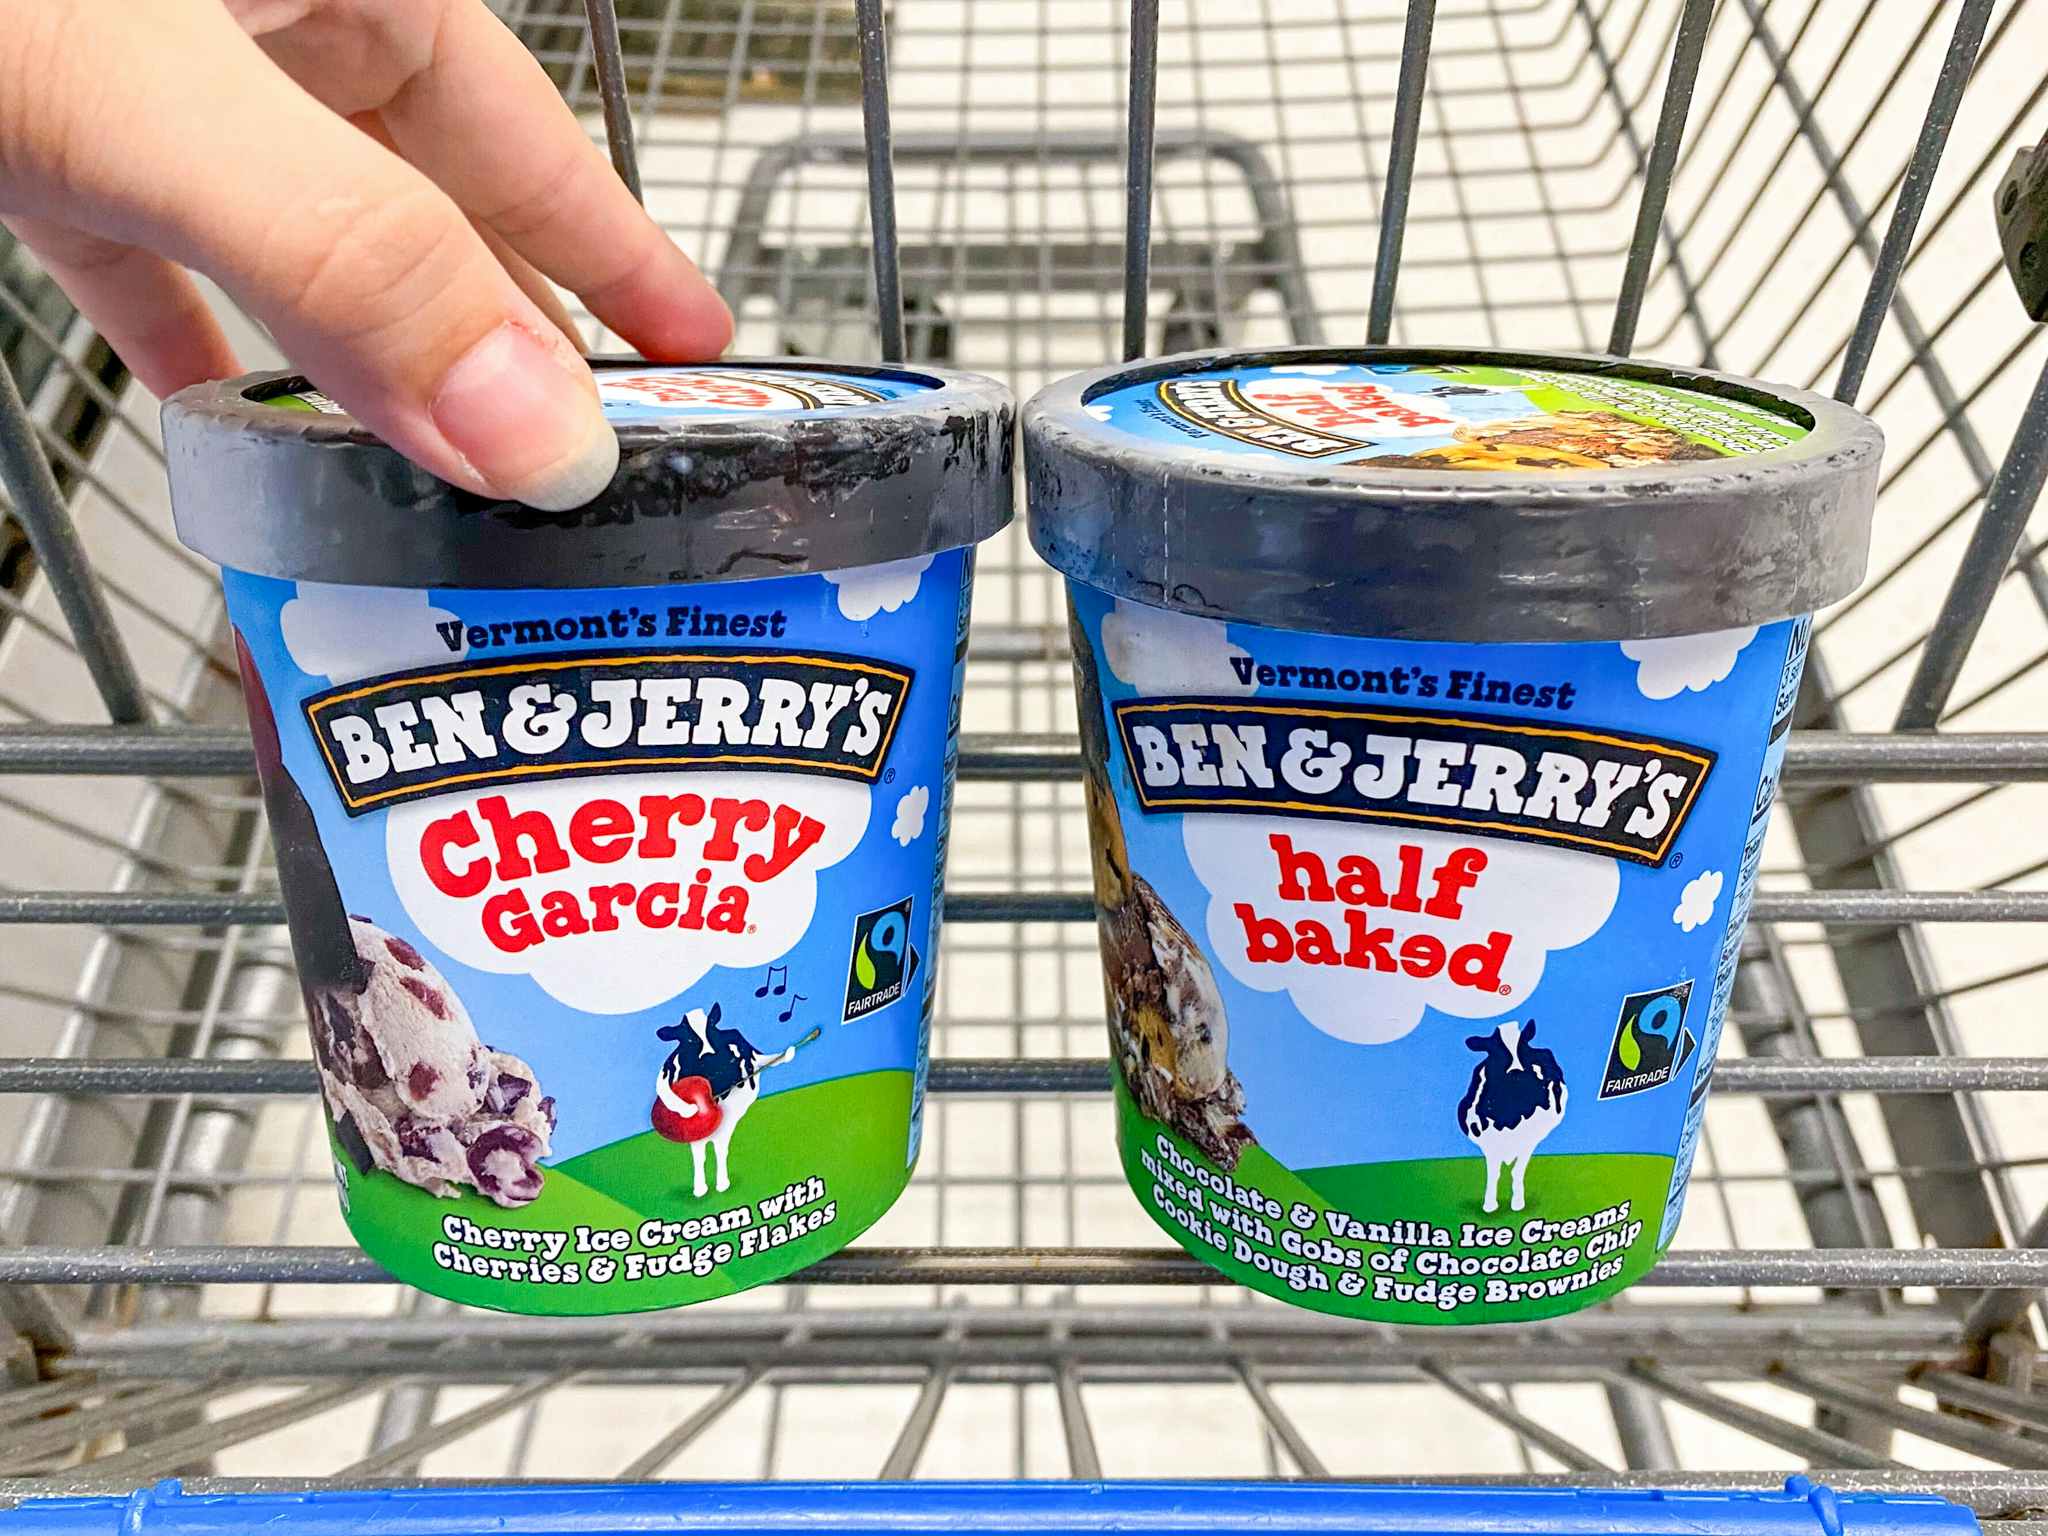 Two Ben & Jerry's Ice Cream products in Walmart shopping cart